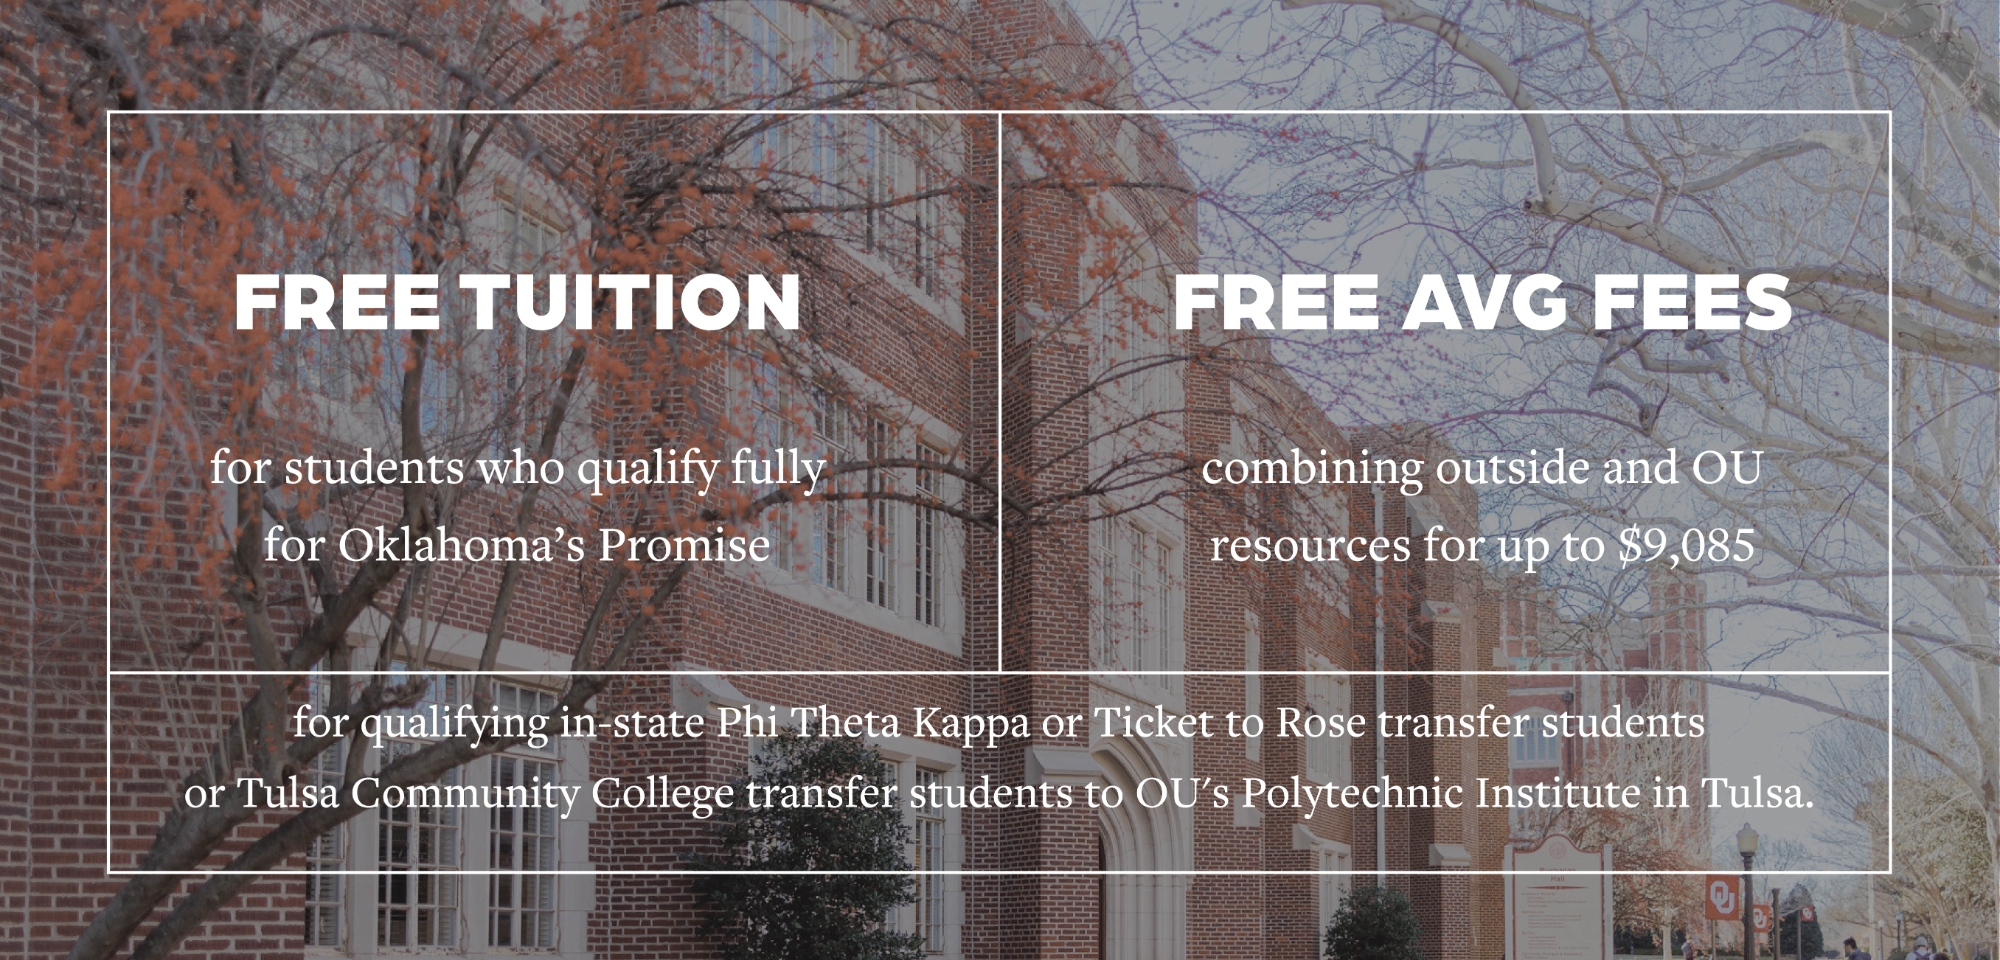 Crimson Commitment: Free tuition for students who qualify fully for Oklahoma's Promise, free average fees combining outside and OU resources for up to $9,085 for qualifying in-state Phi Theta Kappa or Ticket to Rose transfer students